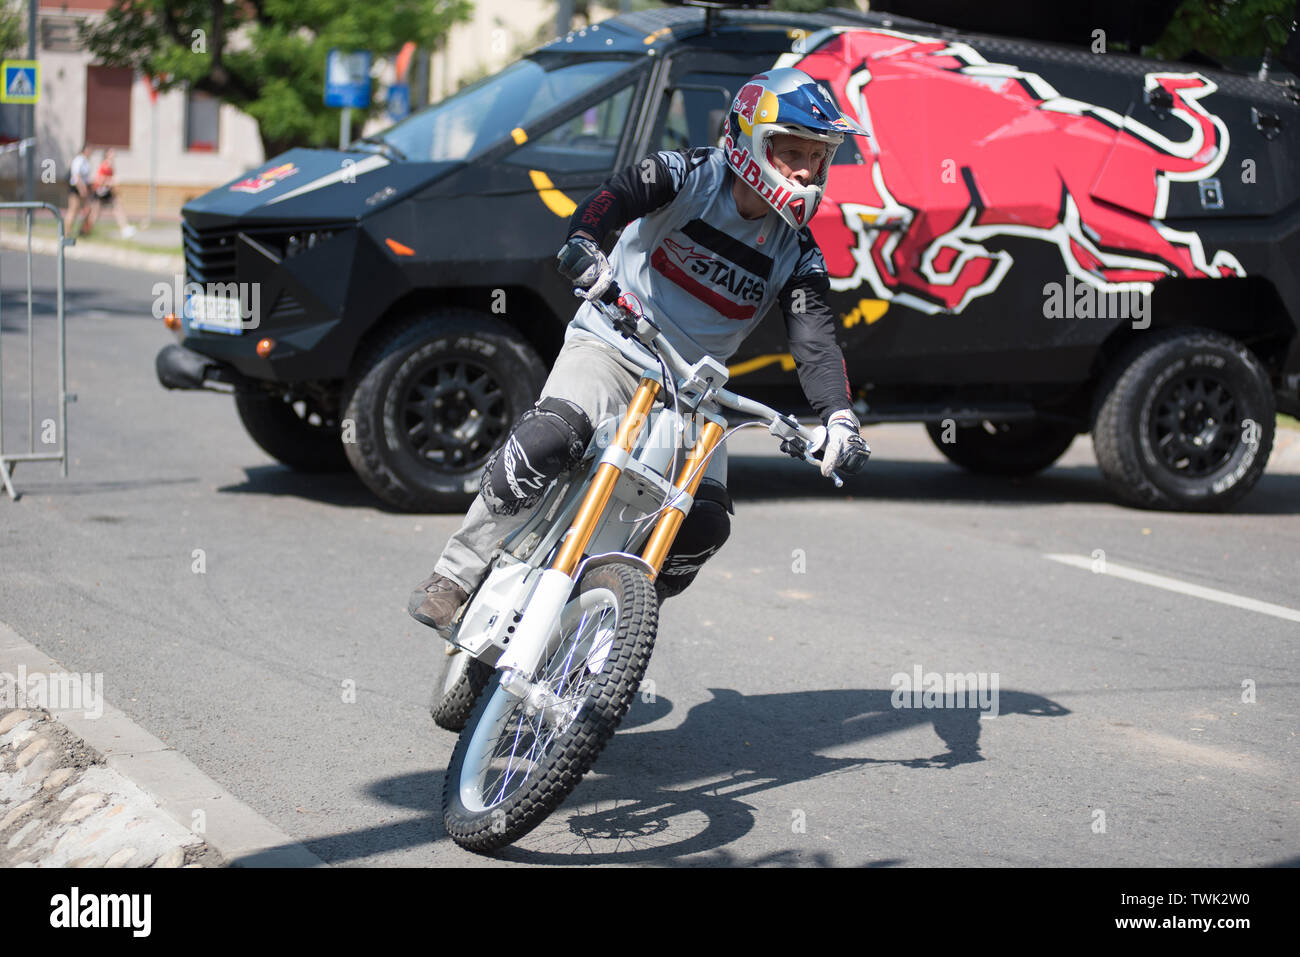 CLUJ, ROMANIA - JUNE 16, 2019: Legendary motorcyclist Chris Pfeiffer stunt riding doing a demonstration with a BMW electric motion bike at Sports Fest Stock Photo